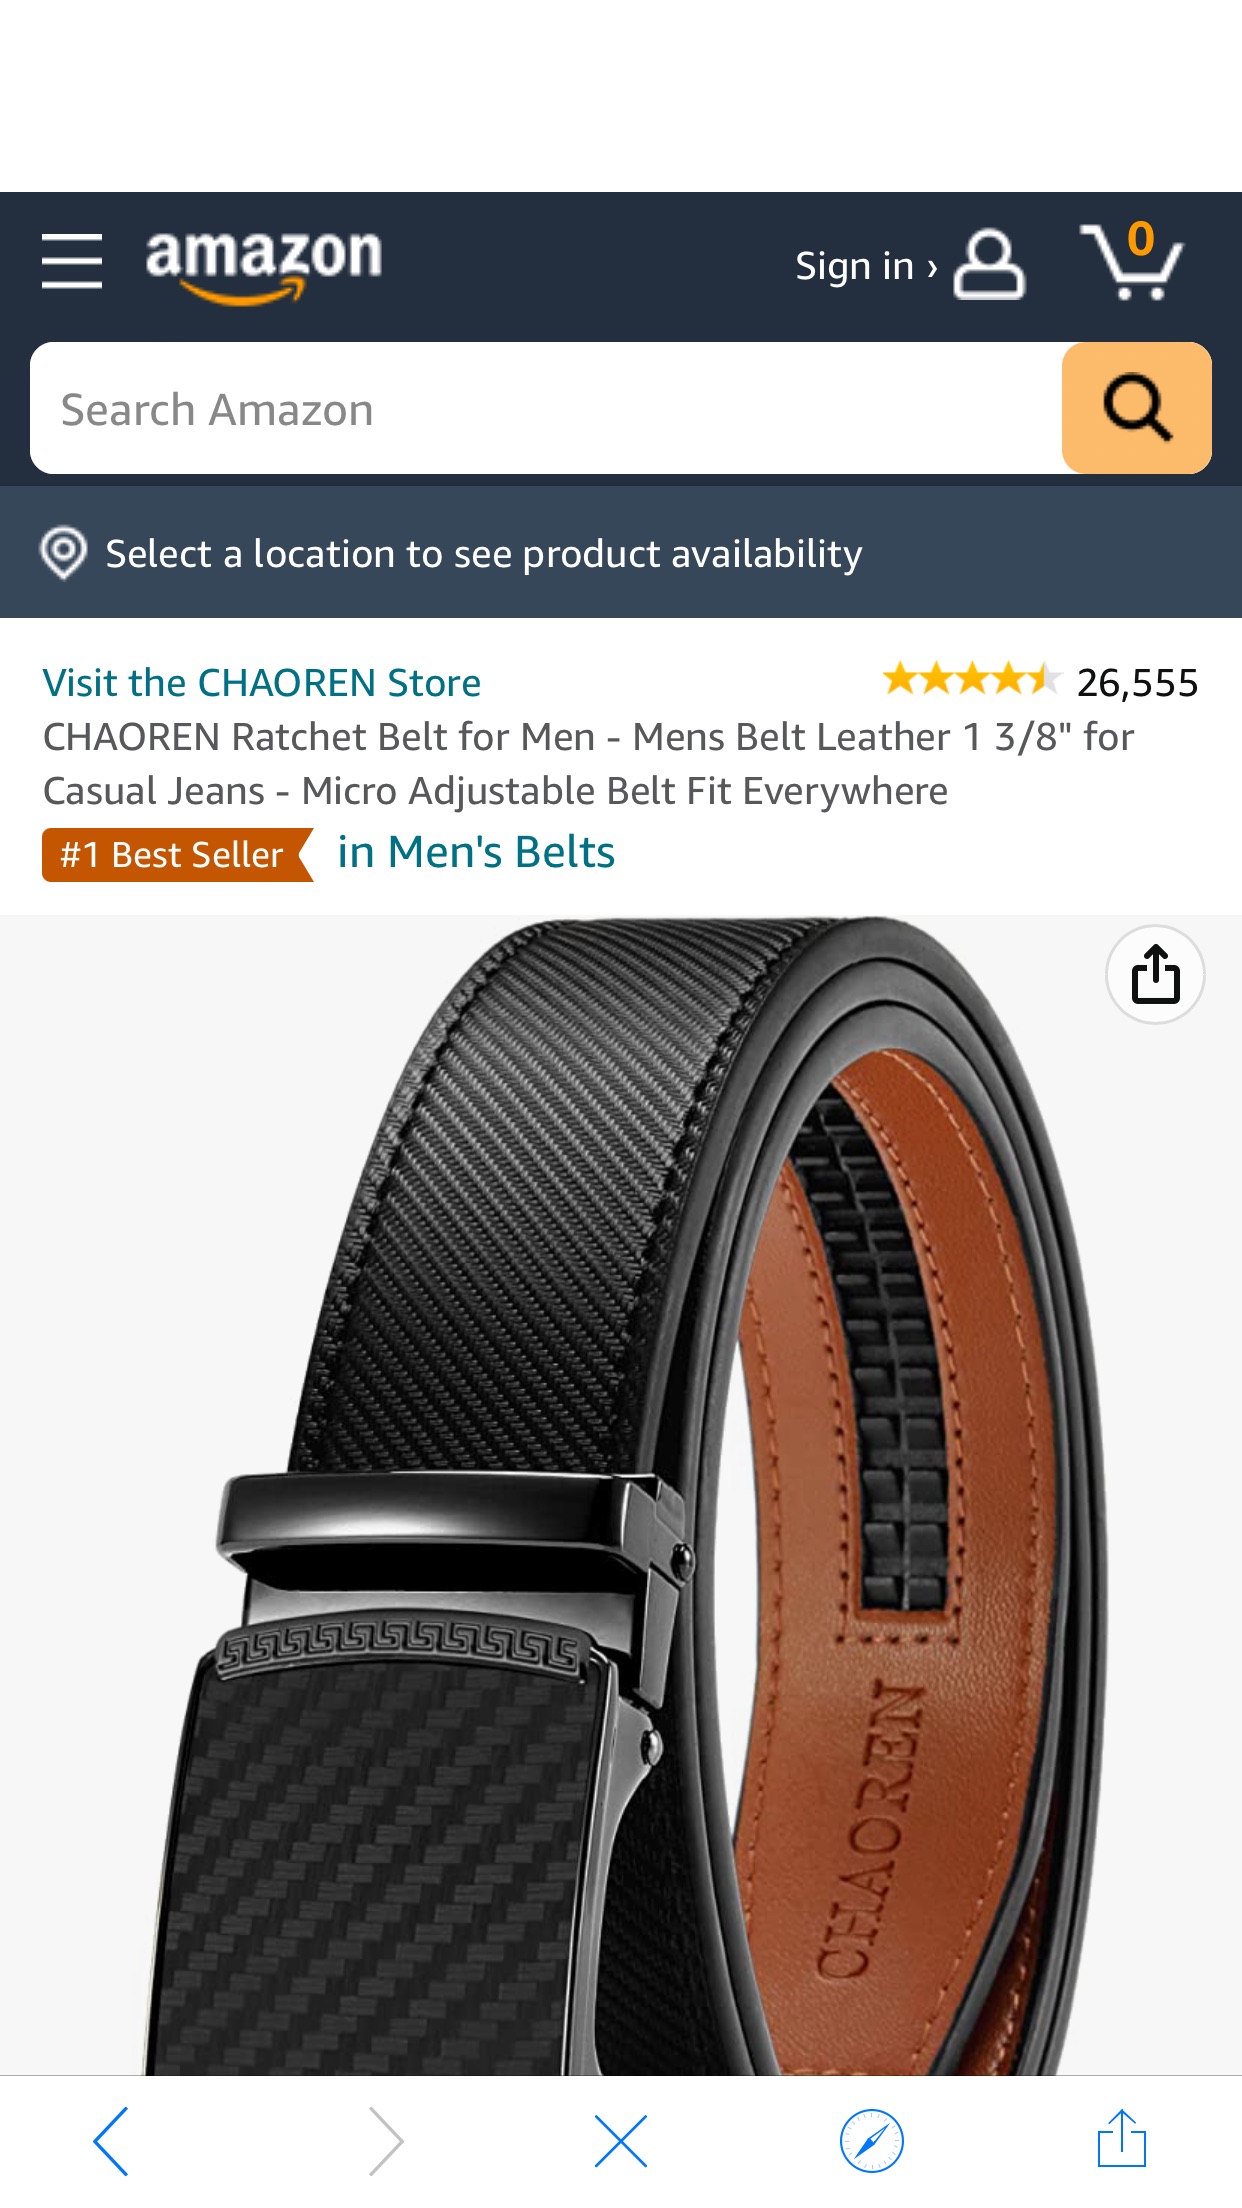 CHAOREN Ratchet Belt for Men - Mens Belt Leather 1 3/8" for Casual Jeans - Micro Adjustable Belt Fit Everywhere at 皮带